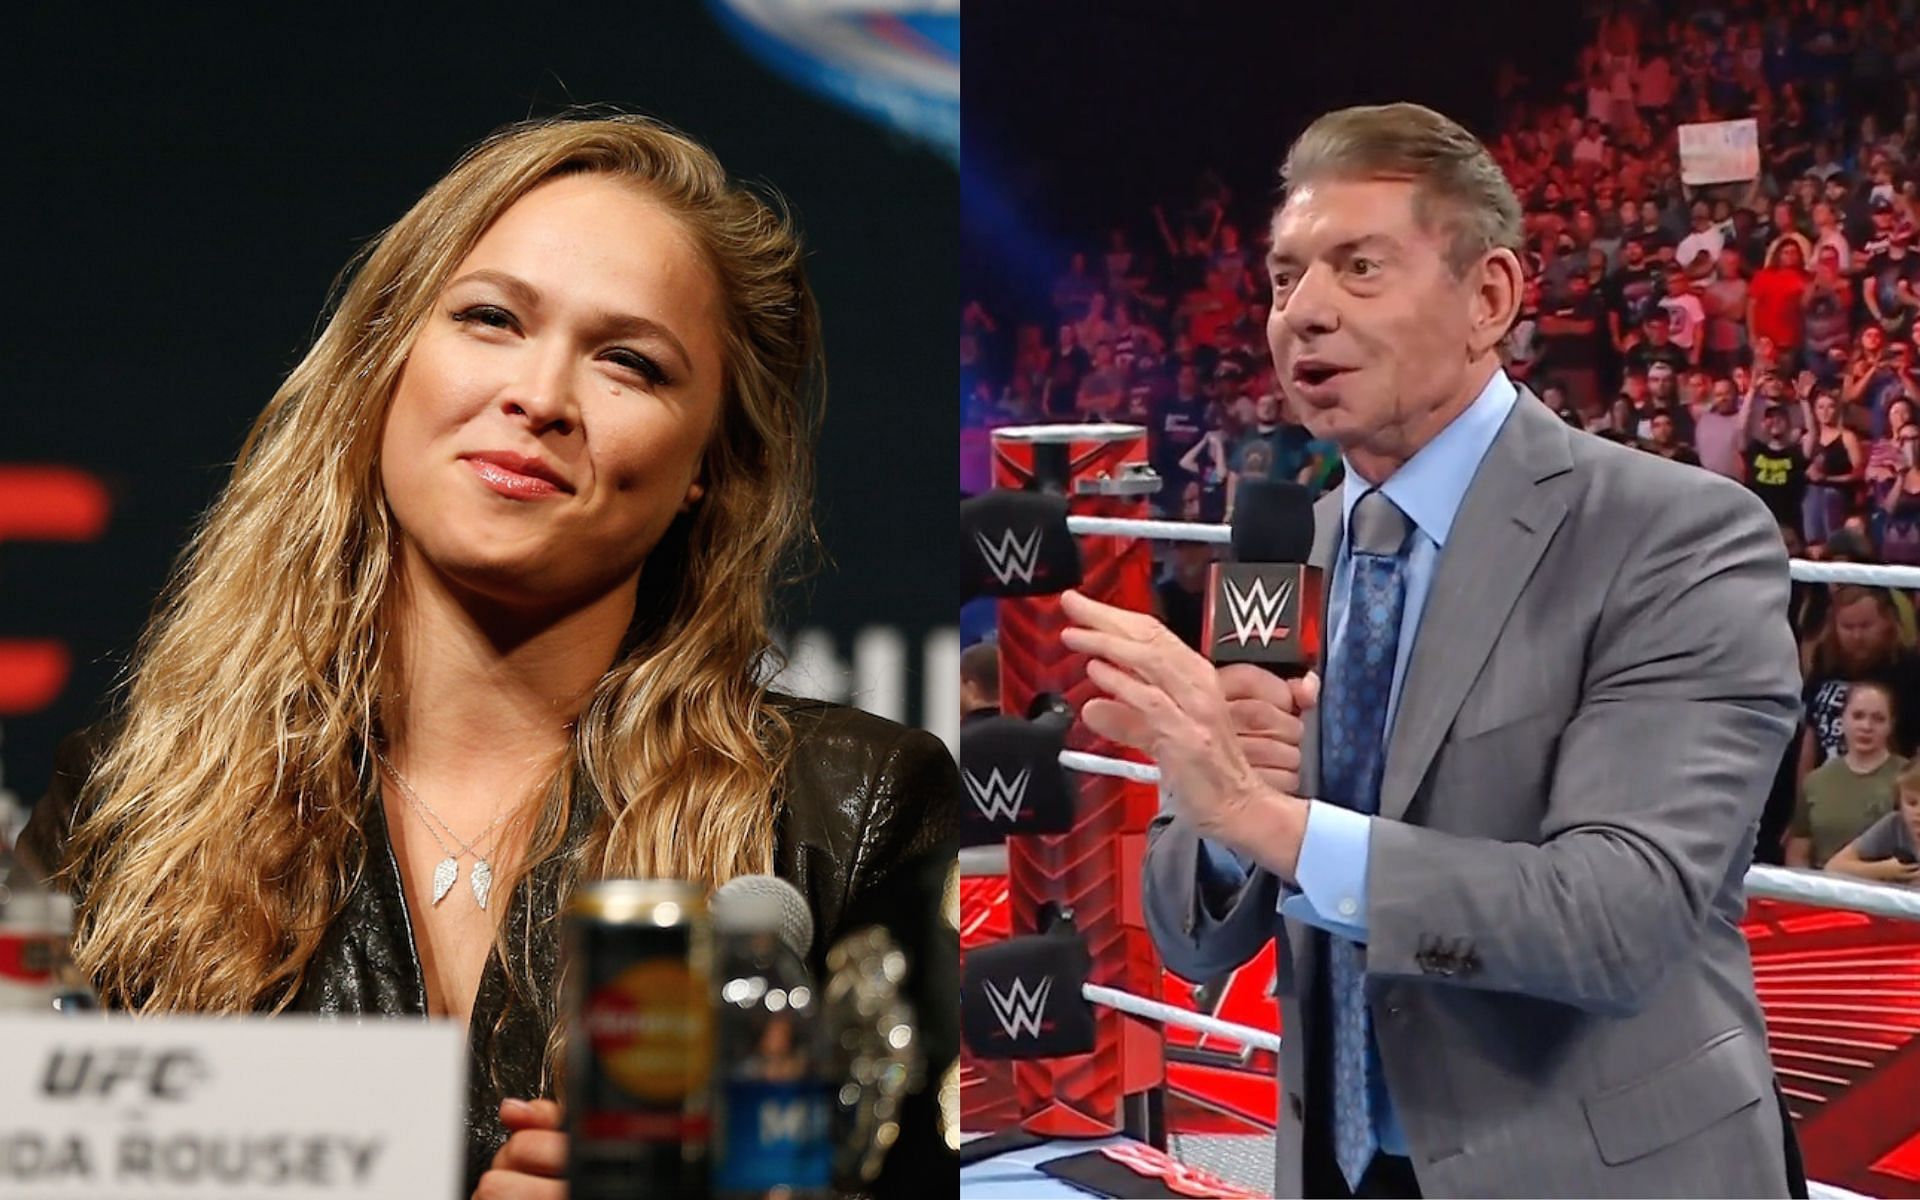 Ronda Rousey (left) makes a bold claim on Vince McMahon (right) following his departure from WWE [Photo Courtesy: @wwe and @ufc on X]